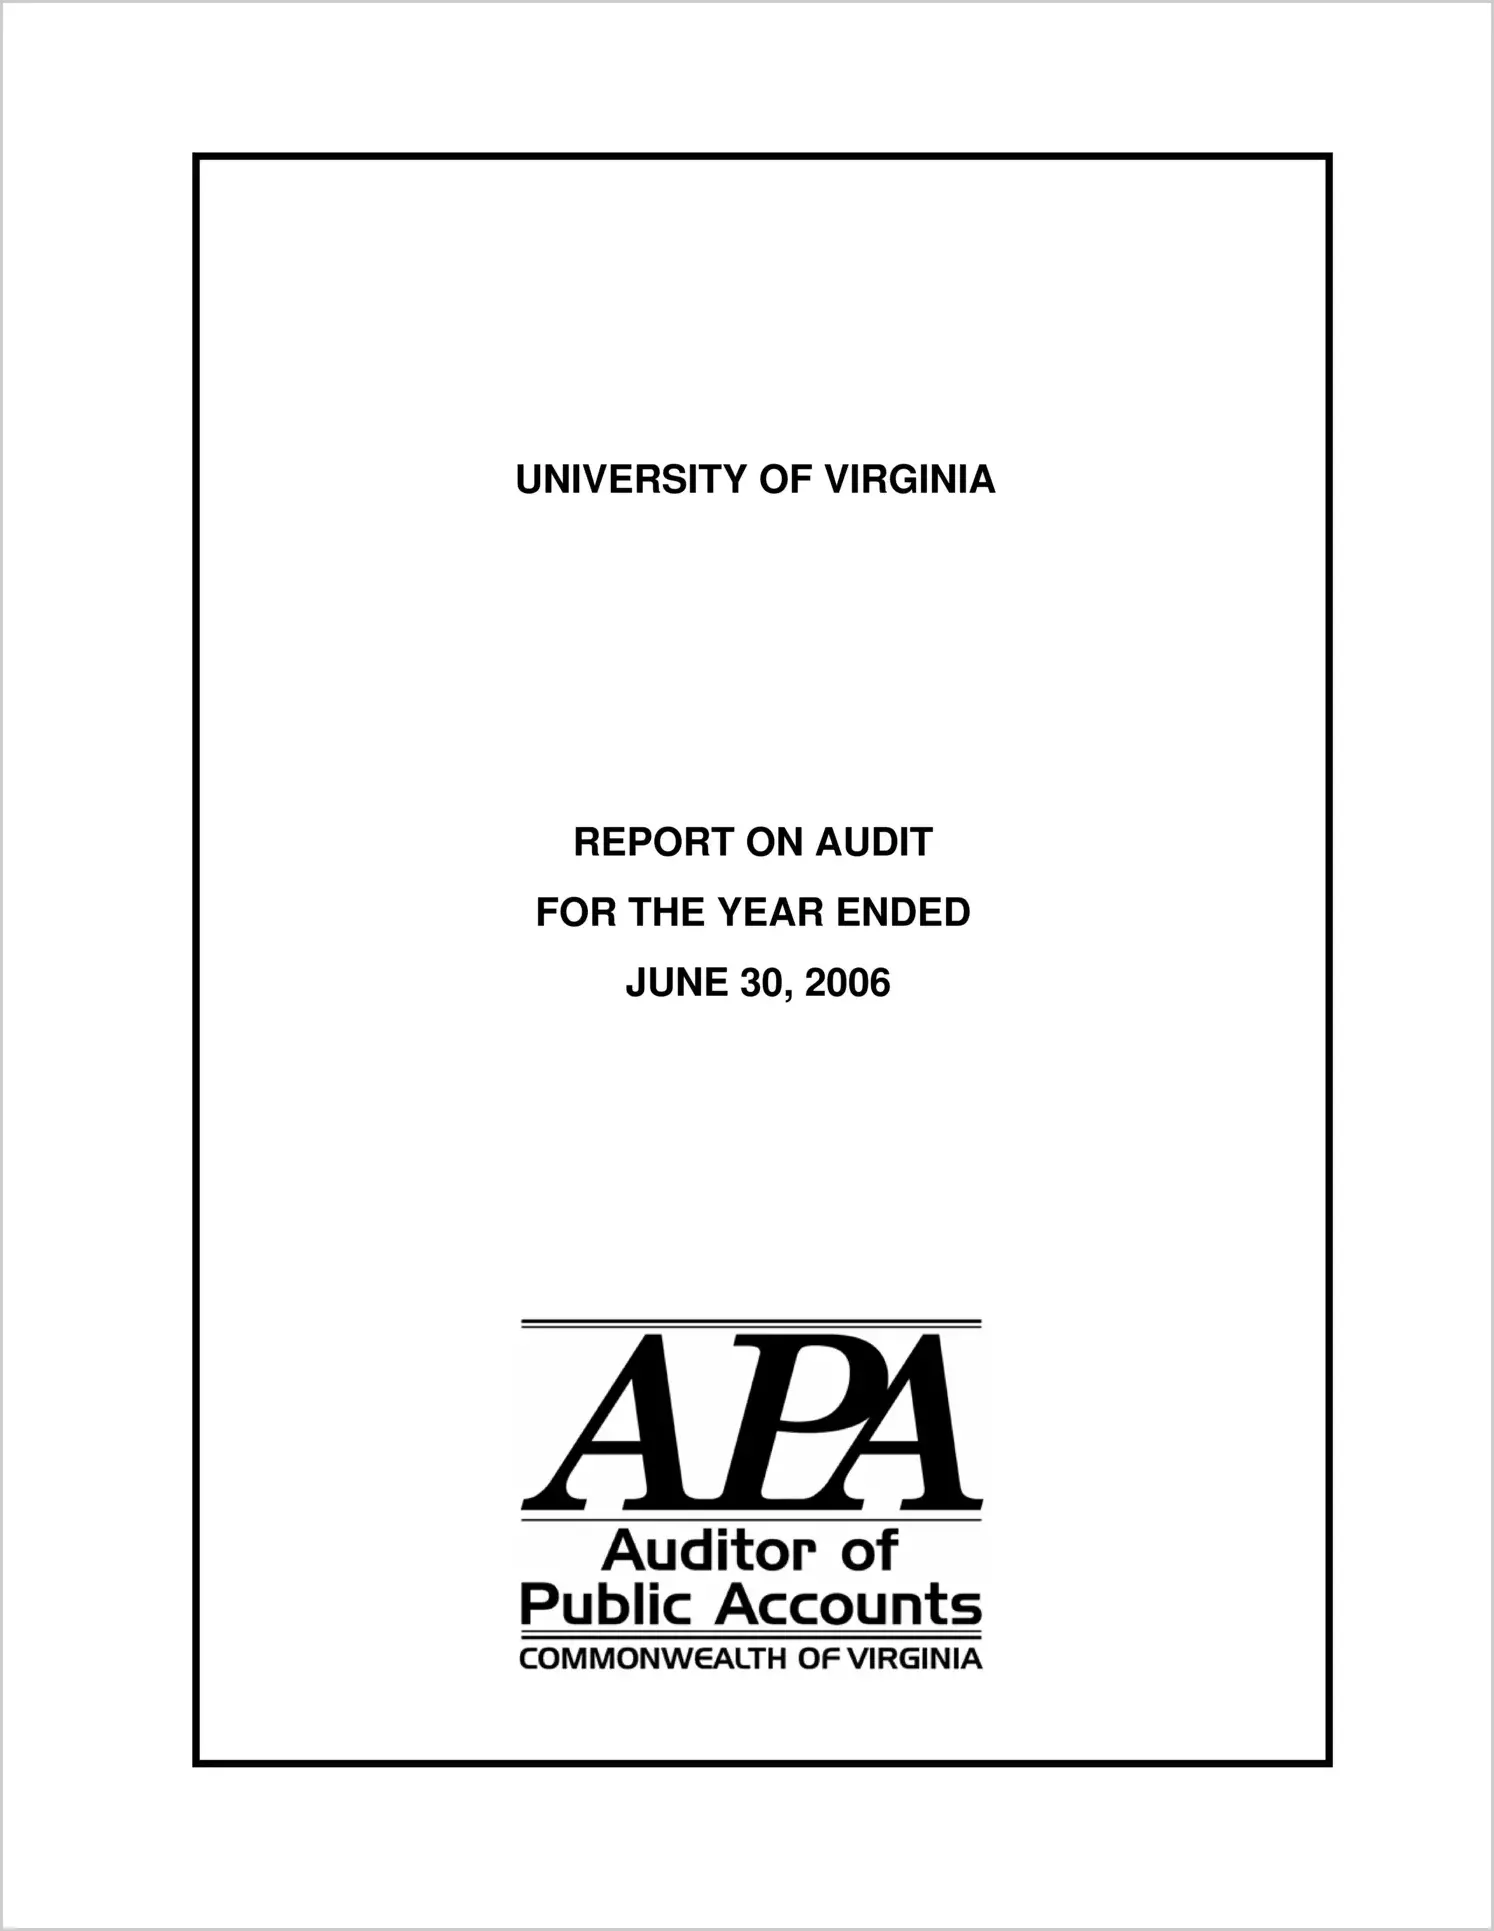 University of Virginia for the year ended June 30, 2006